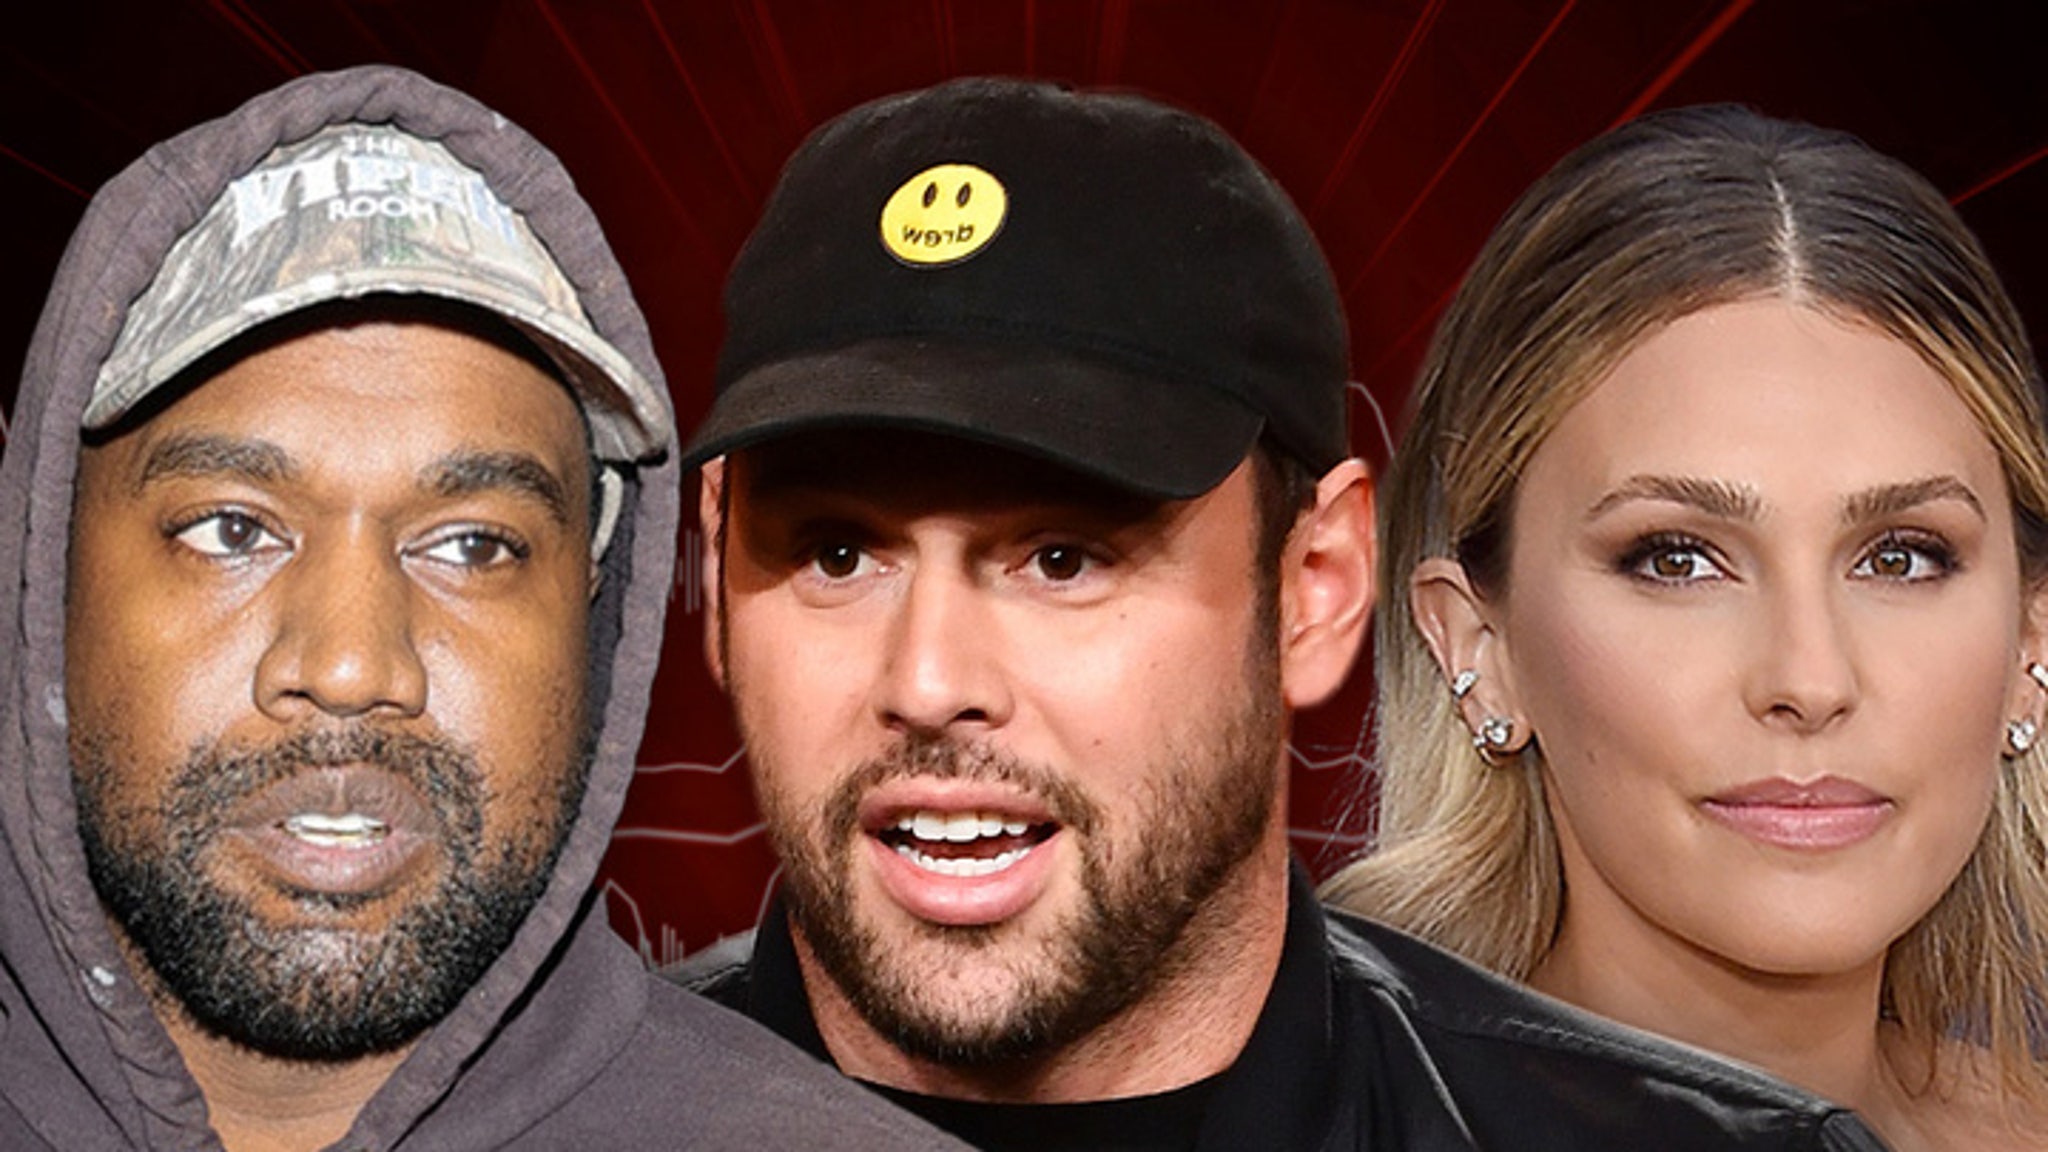 Kanye West Appears to Claim He Slept with Scooter Braun’s Ex-Wife